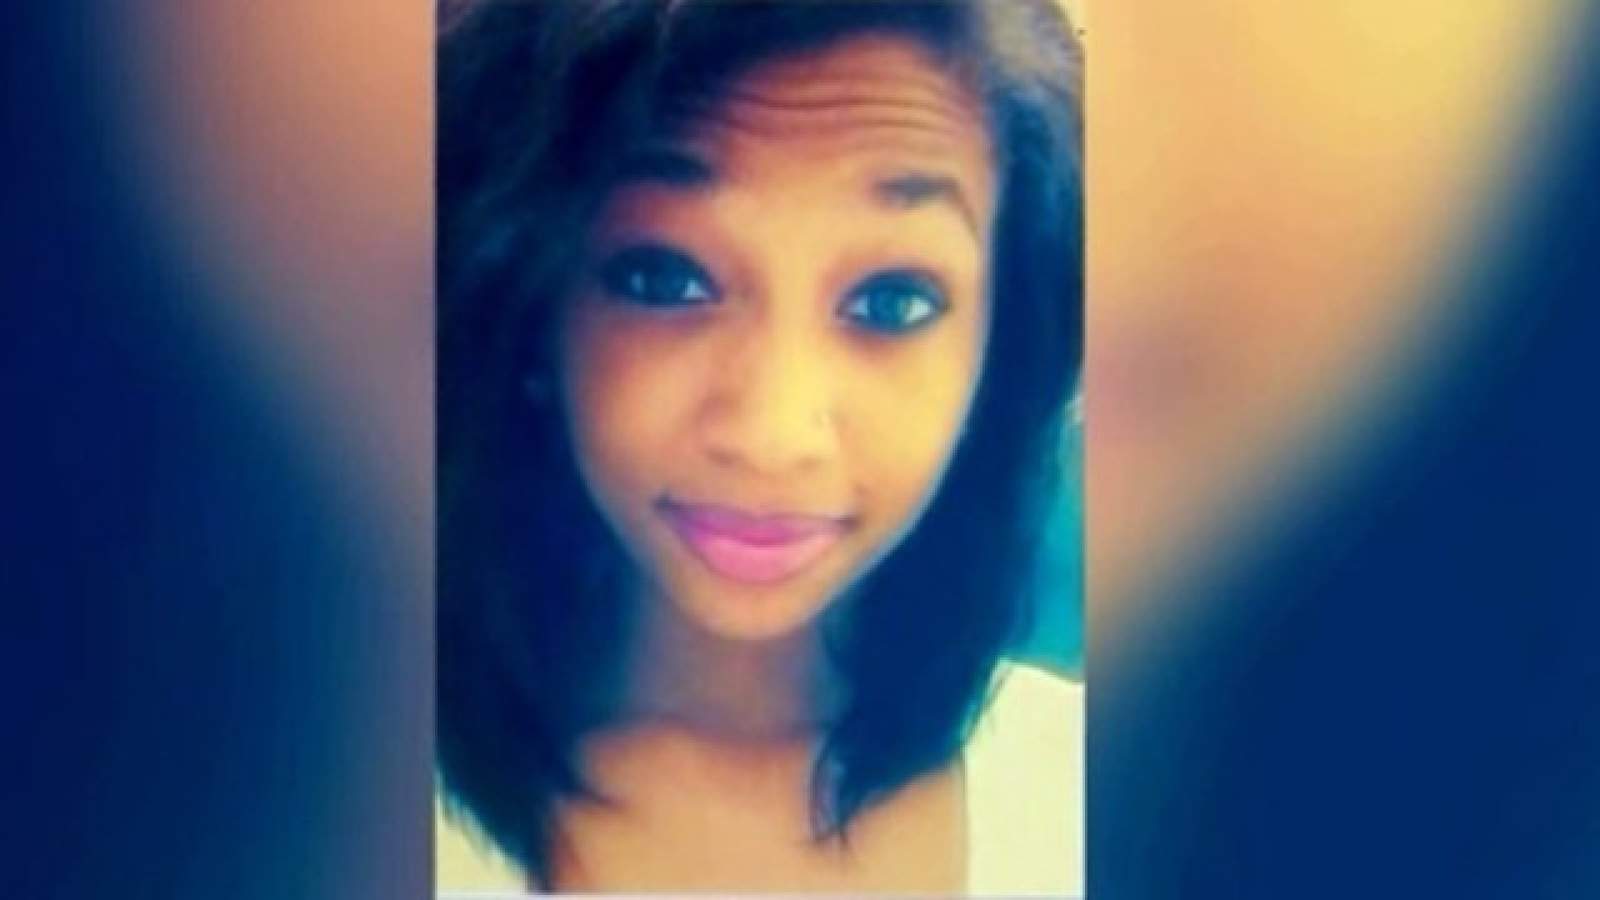 Report: Alexis Murphy’s killer led authorities to her remains